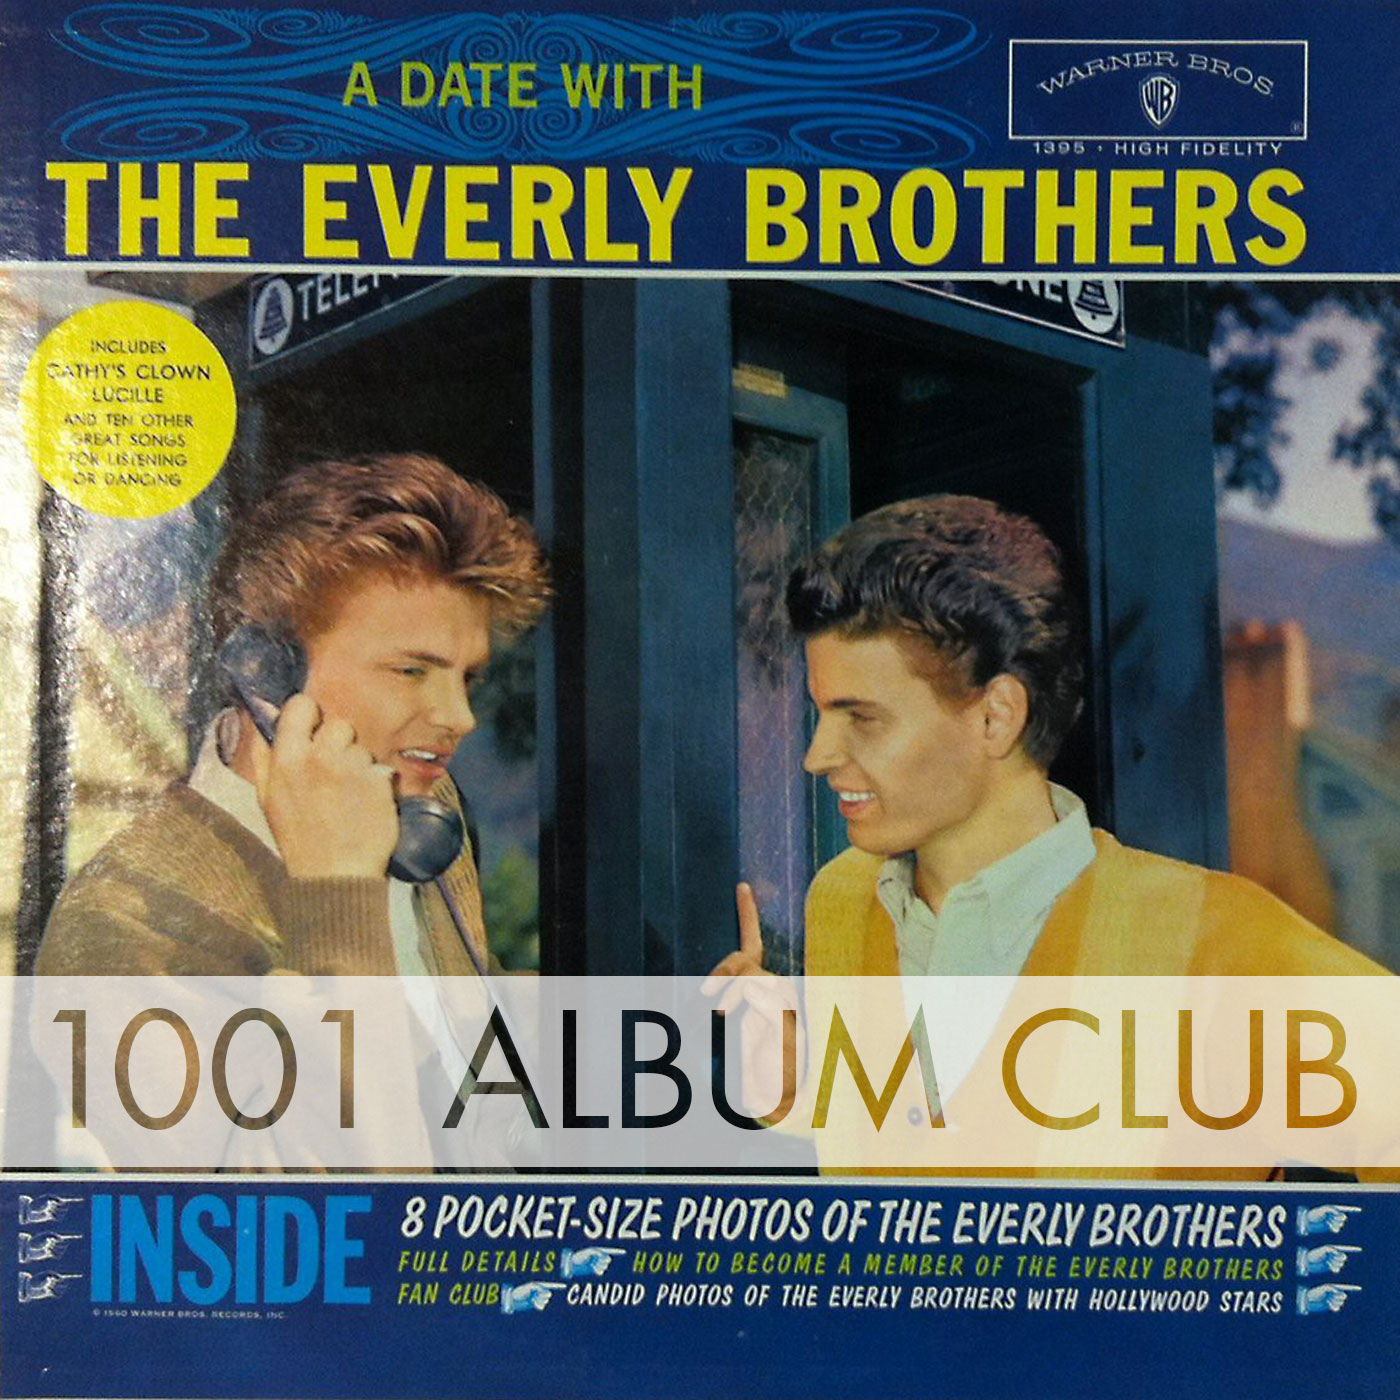 027 The Everly Brothers – a Date With the Everly Brothers – 1001 